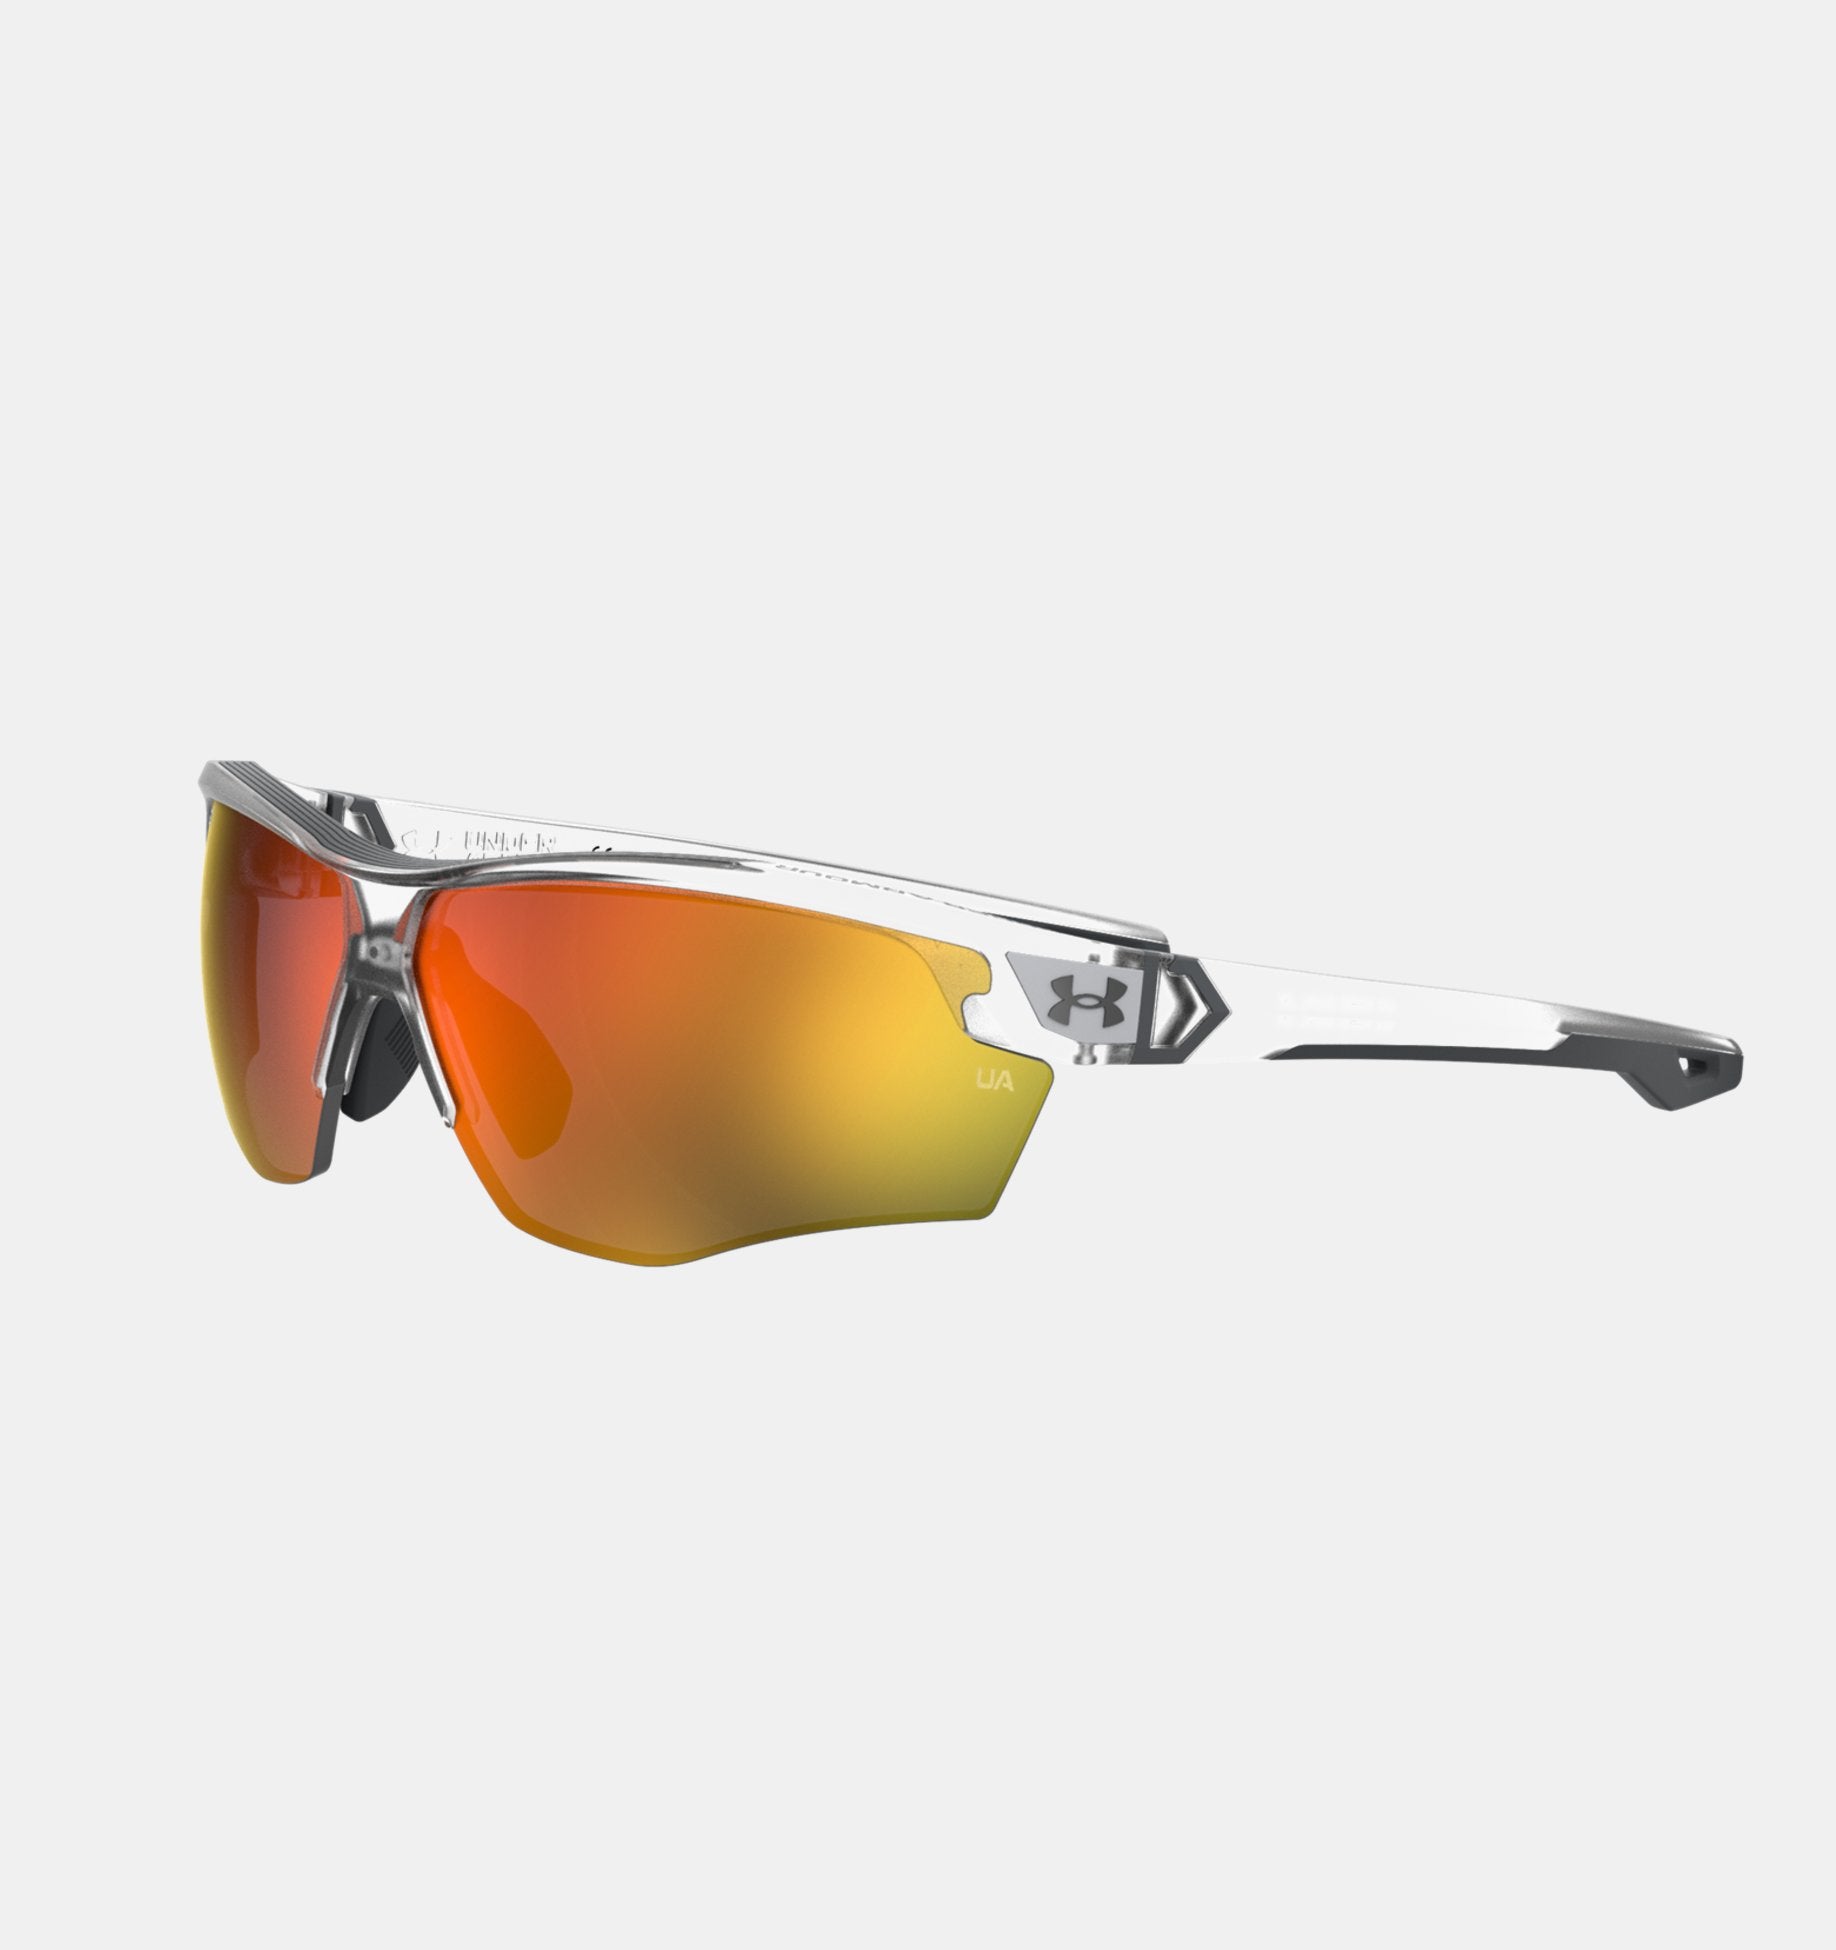 Under Armour Yard Dual Jr. Tuned Baseball Sunglasses Accessories Under Armour Product ColorsCrystal Clear / Ruthenium - 991  